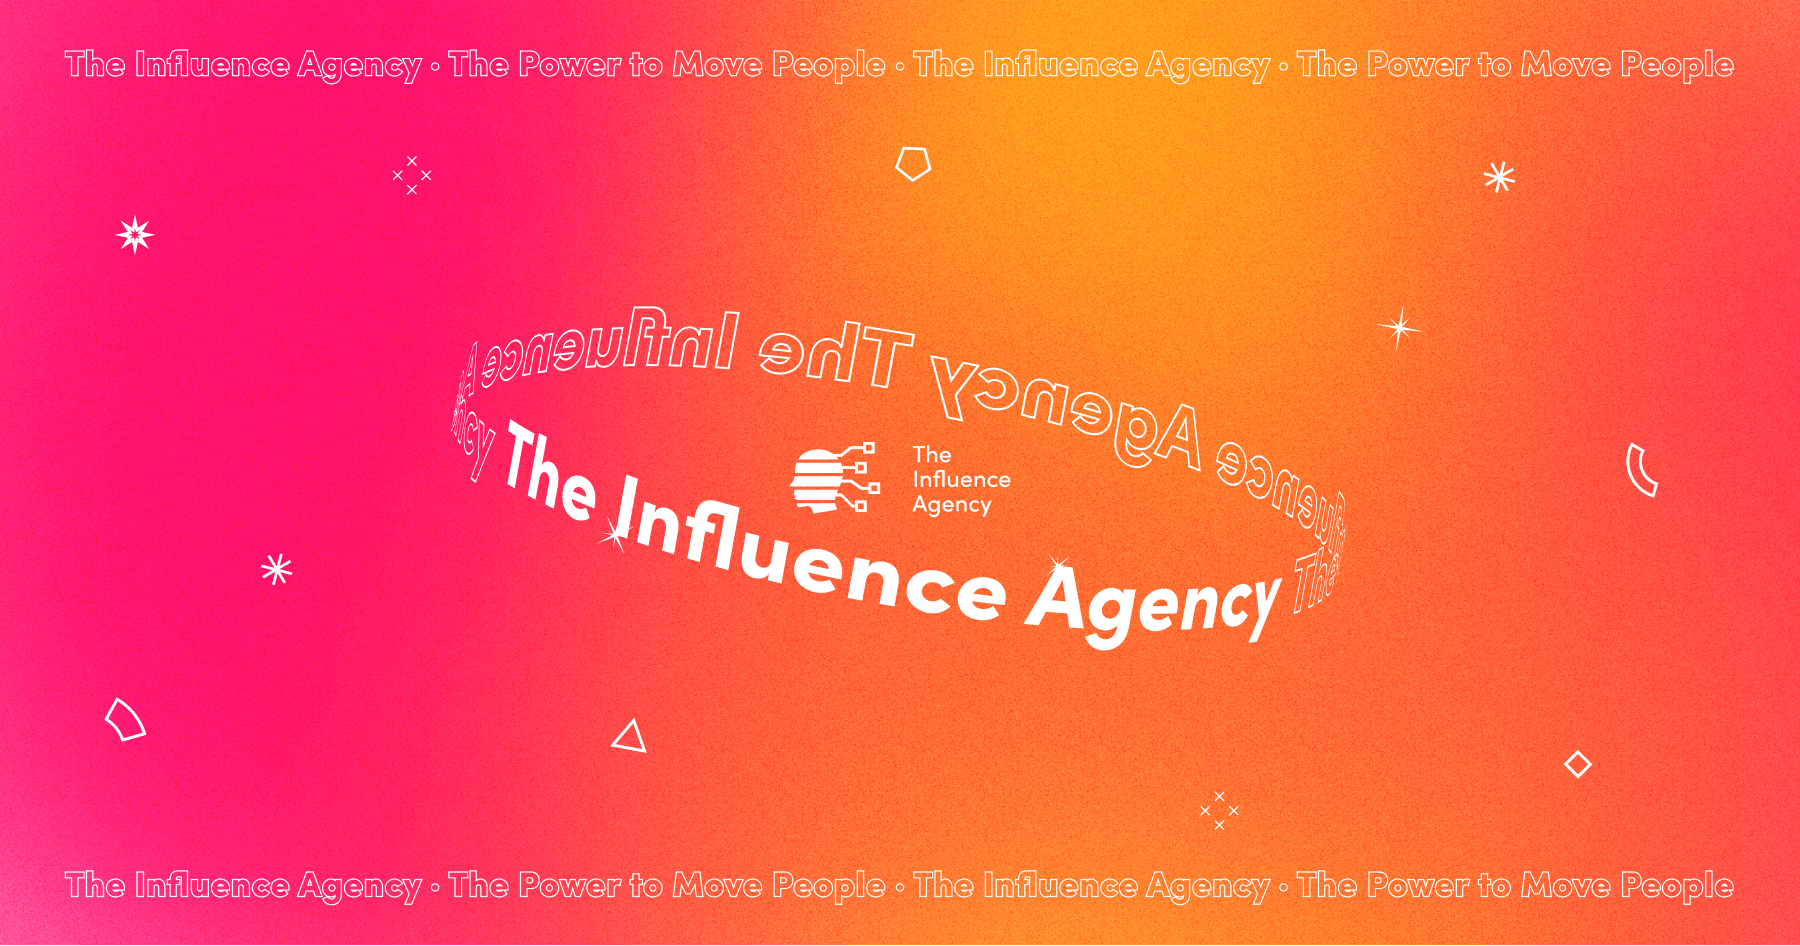 theinfluenceagency.com